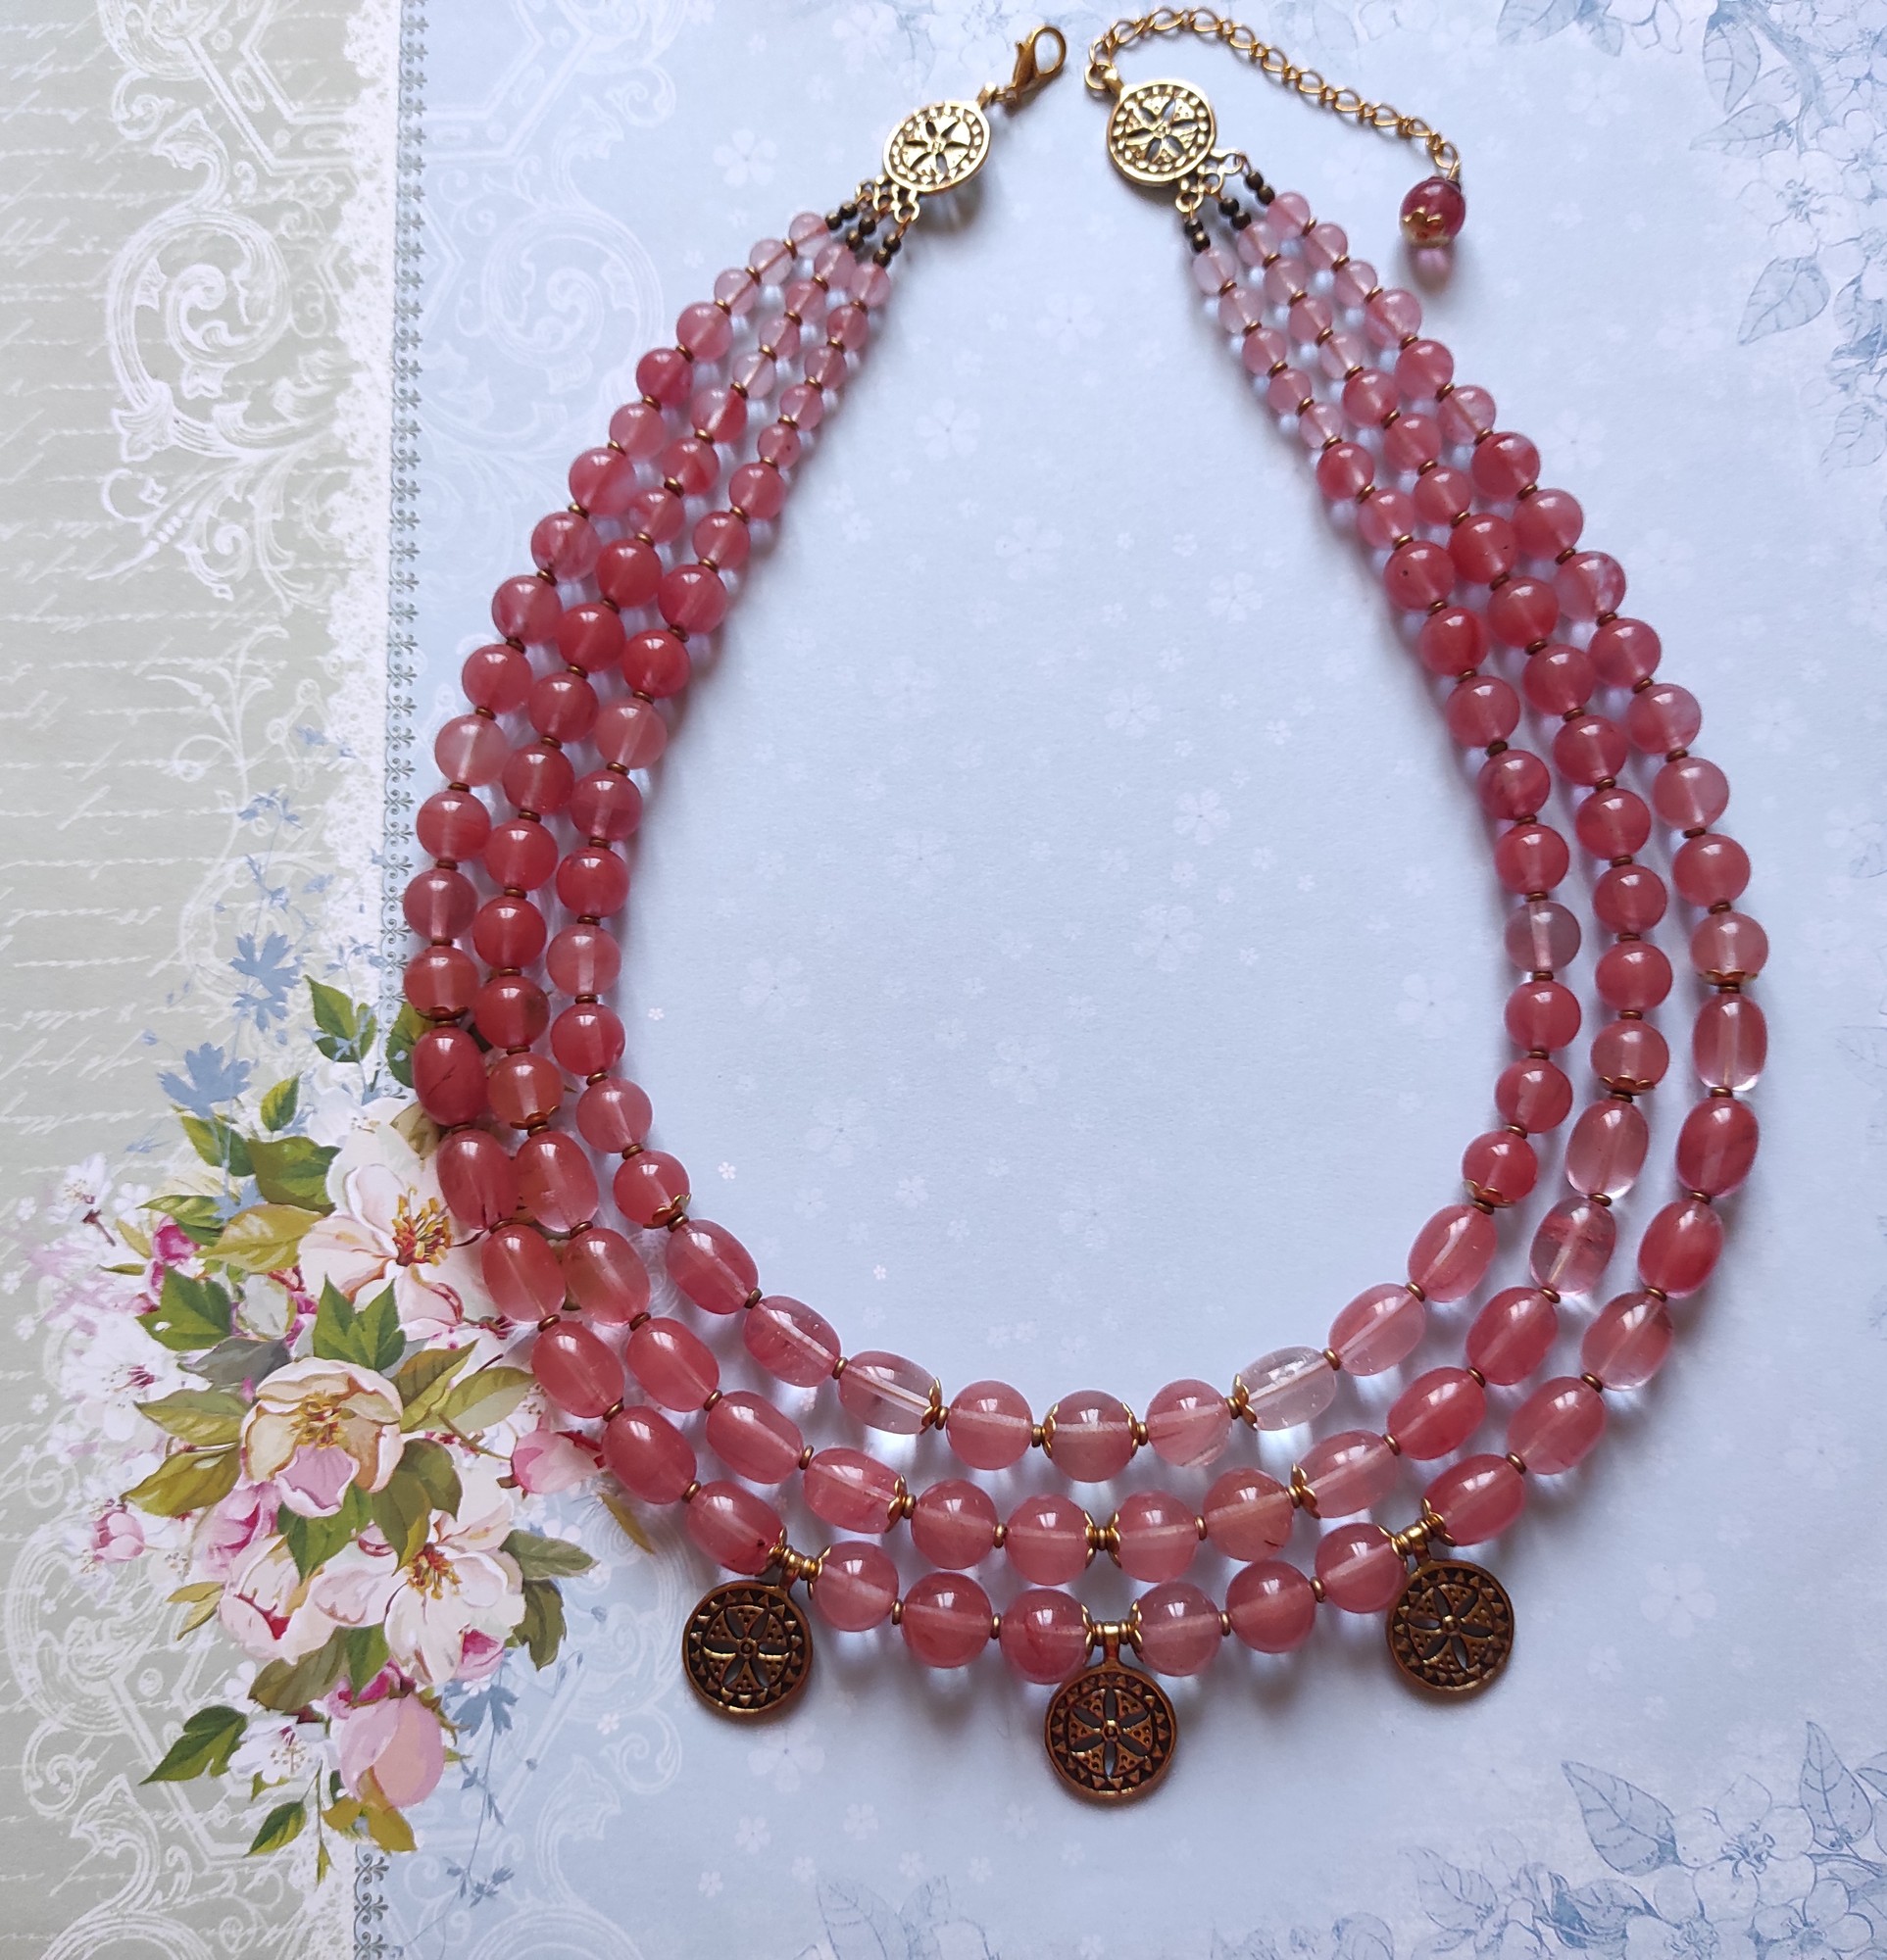 Necklace  "Pink currants" from tourmaline "Watermelon"